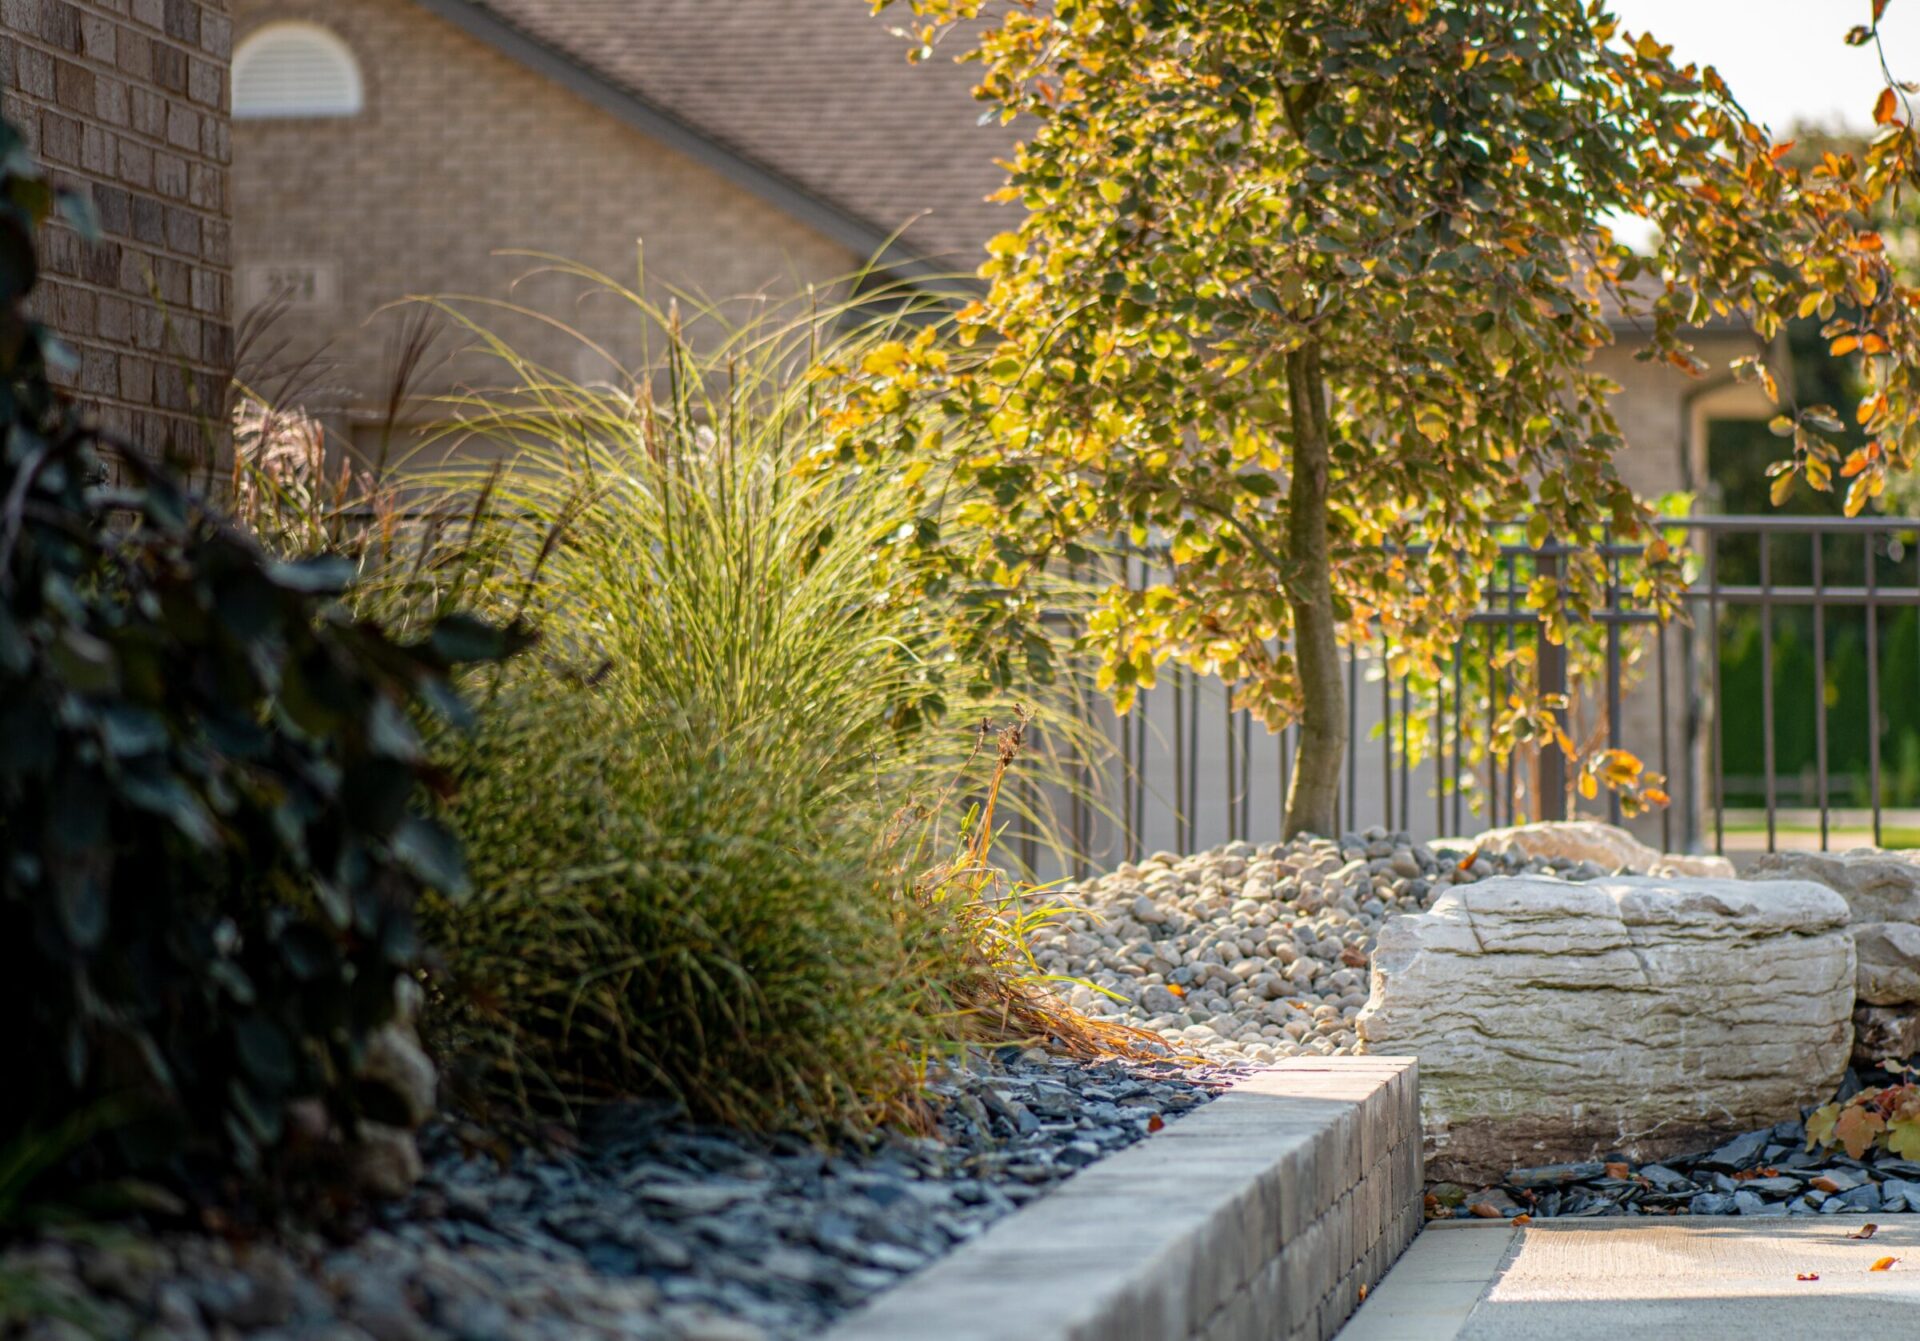 A landscaped garden with ornamental grasses, a tree with autumn leaves, large rocks, and a fence in the background beside a residential building.